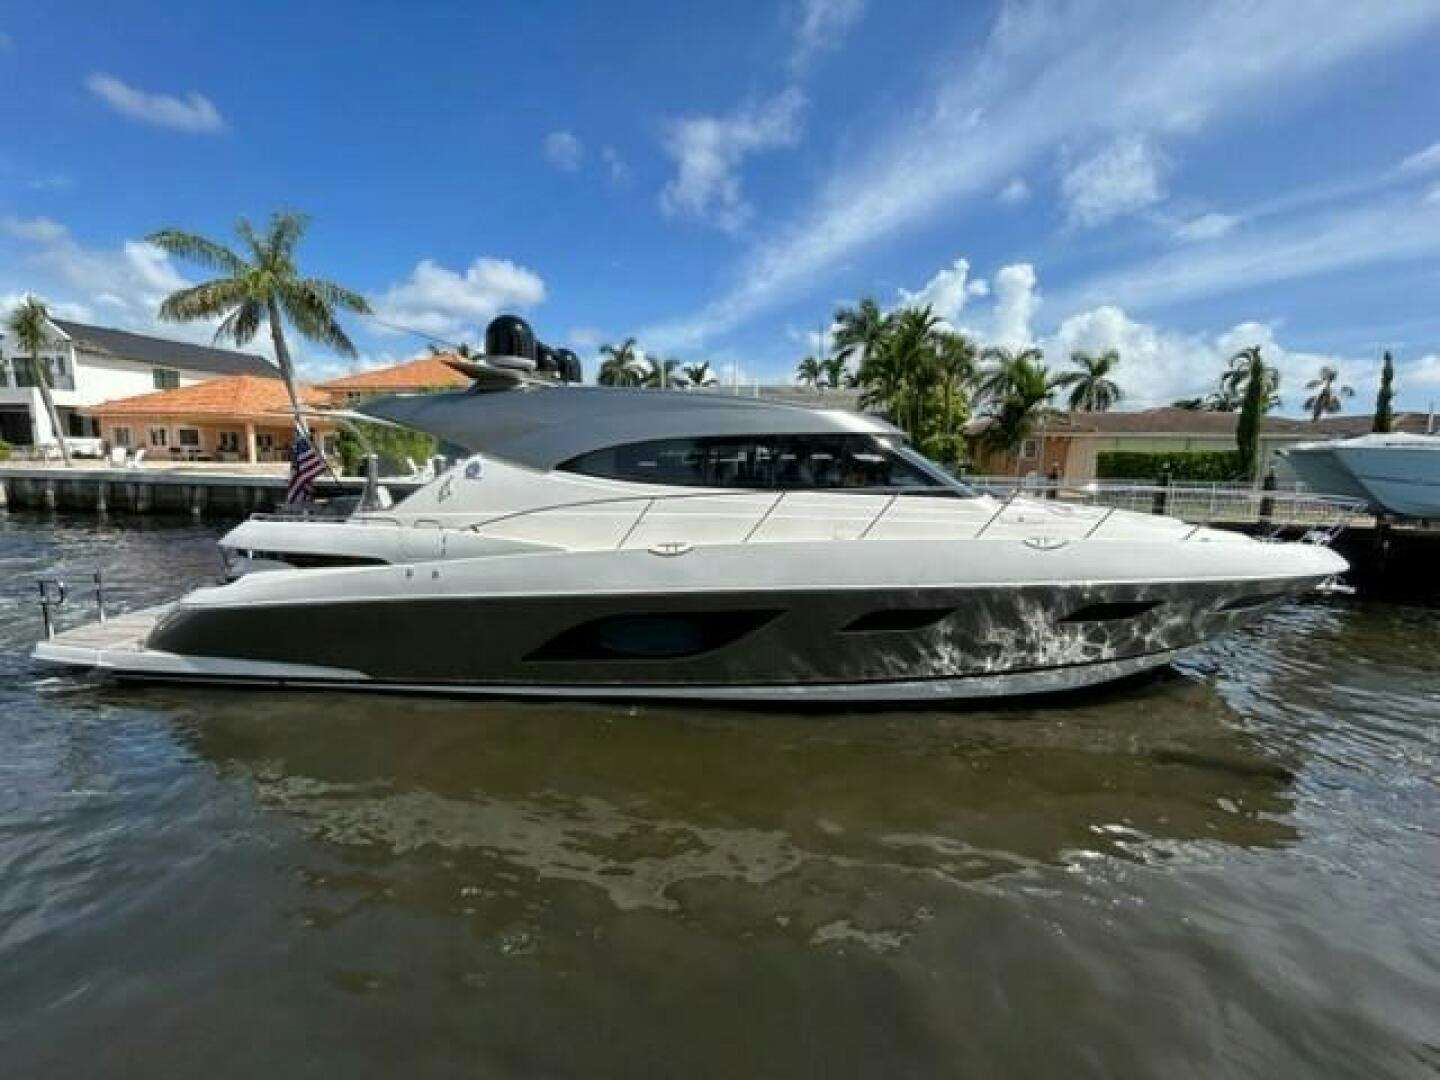 City lights
Yacht for Sale